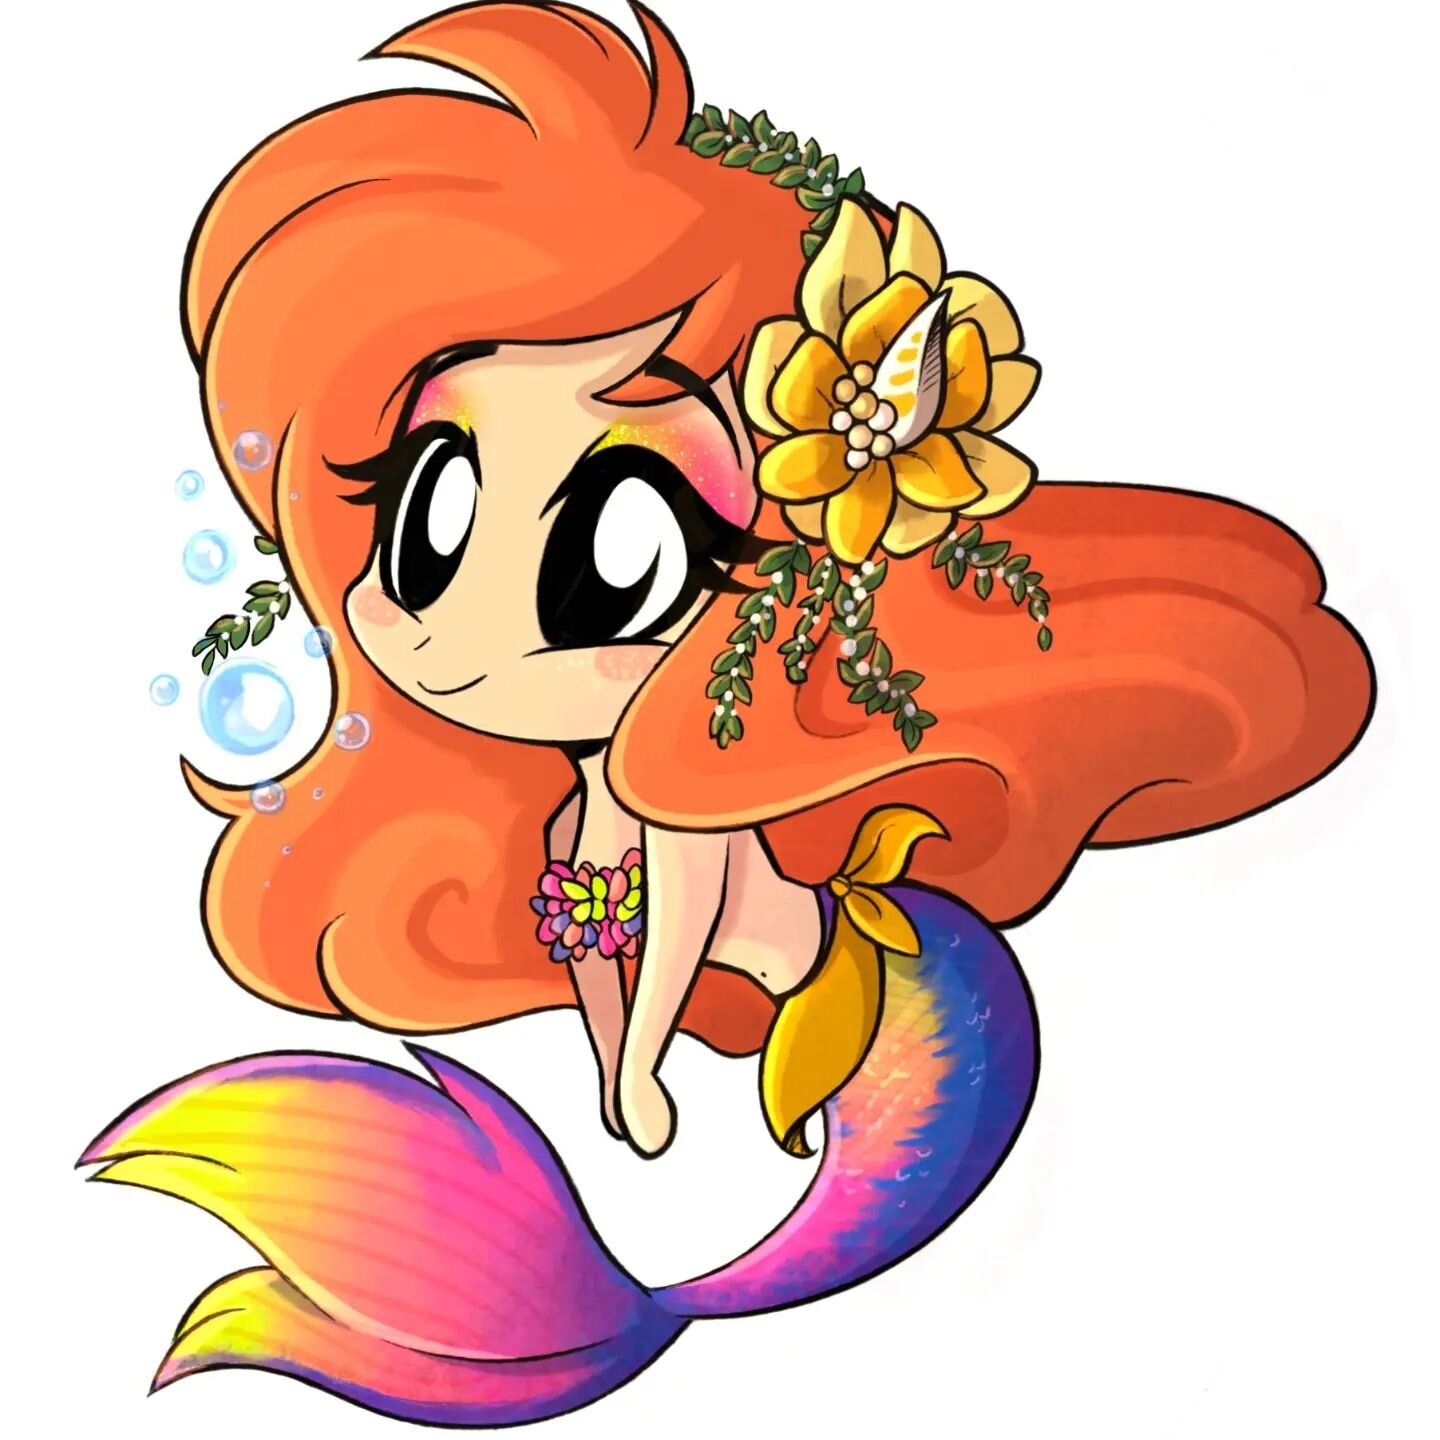 Happy #internationalmermaidday  to all of my finned friends. Here's an adorable piece I commissioned from @gaikotsulily to shell-a-brate! 

#internationalmerfolkday #mermaidday #professionalmermaid #promermaid #hireamermaid #mermaidlife #mermaidmagic